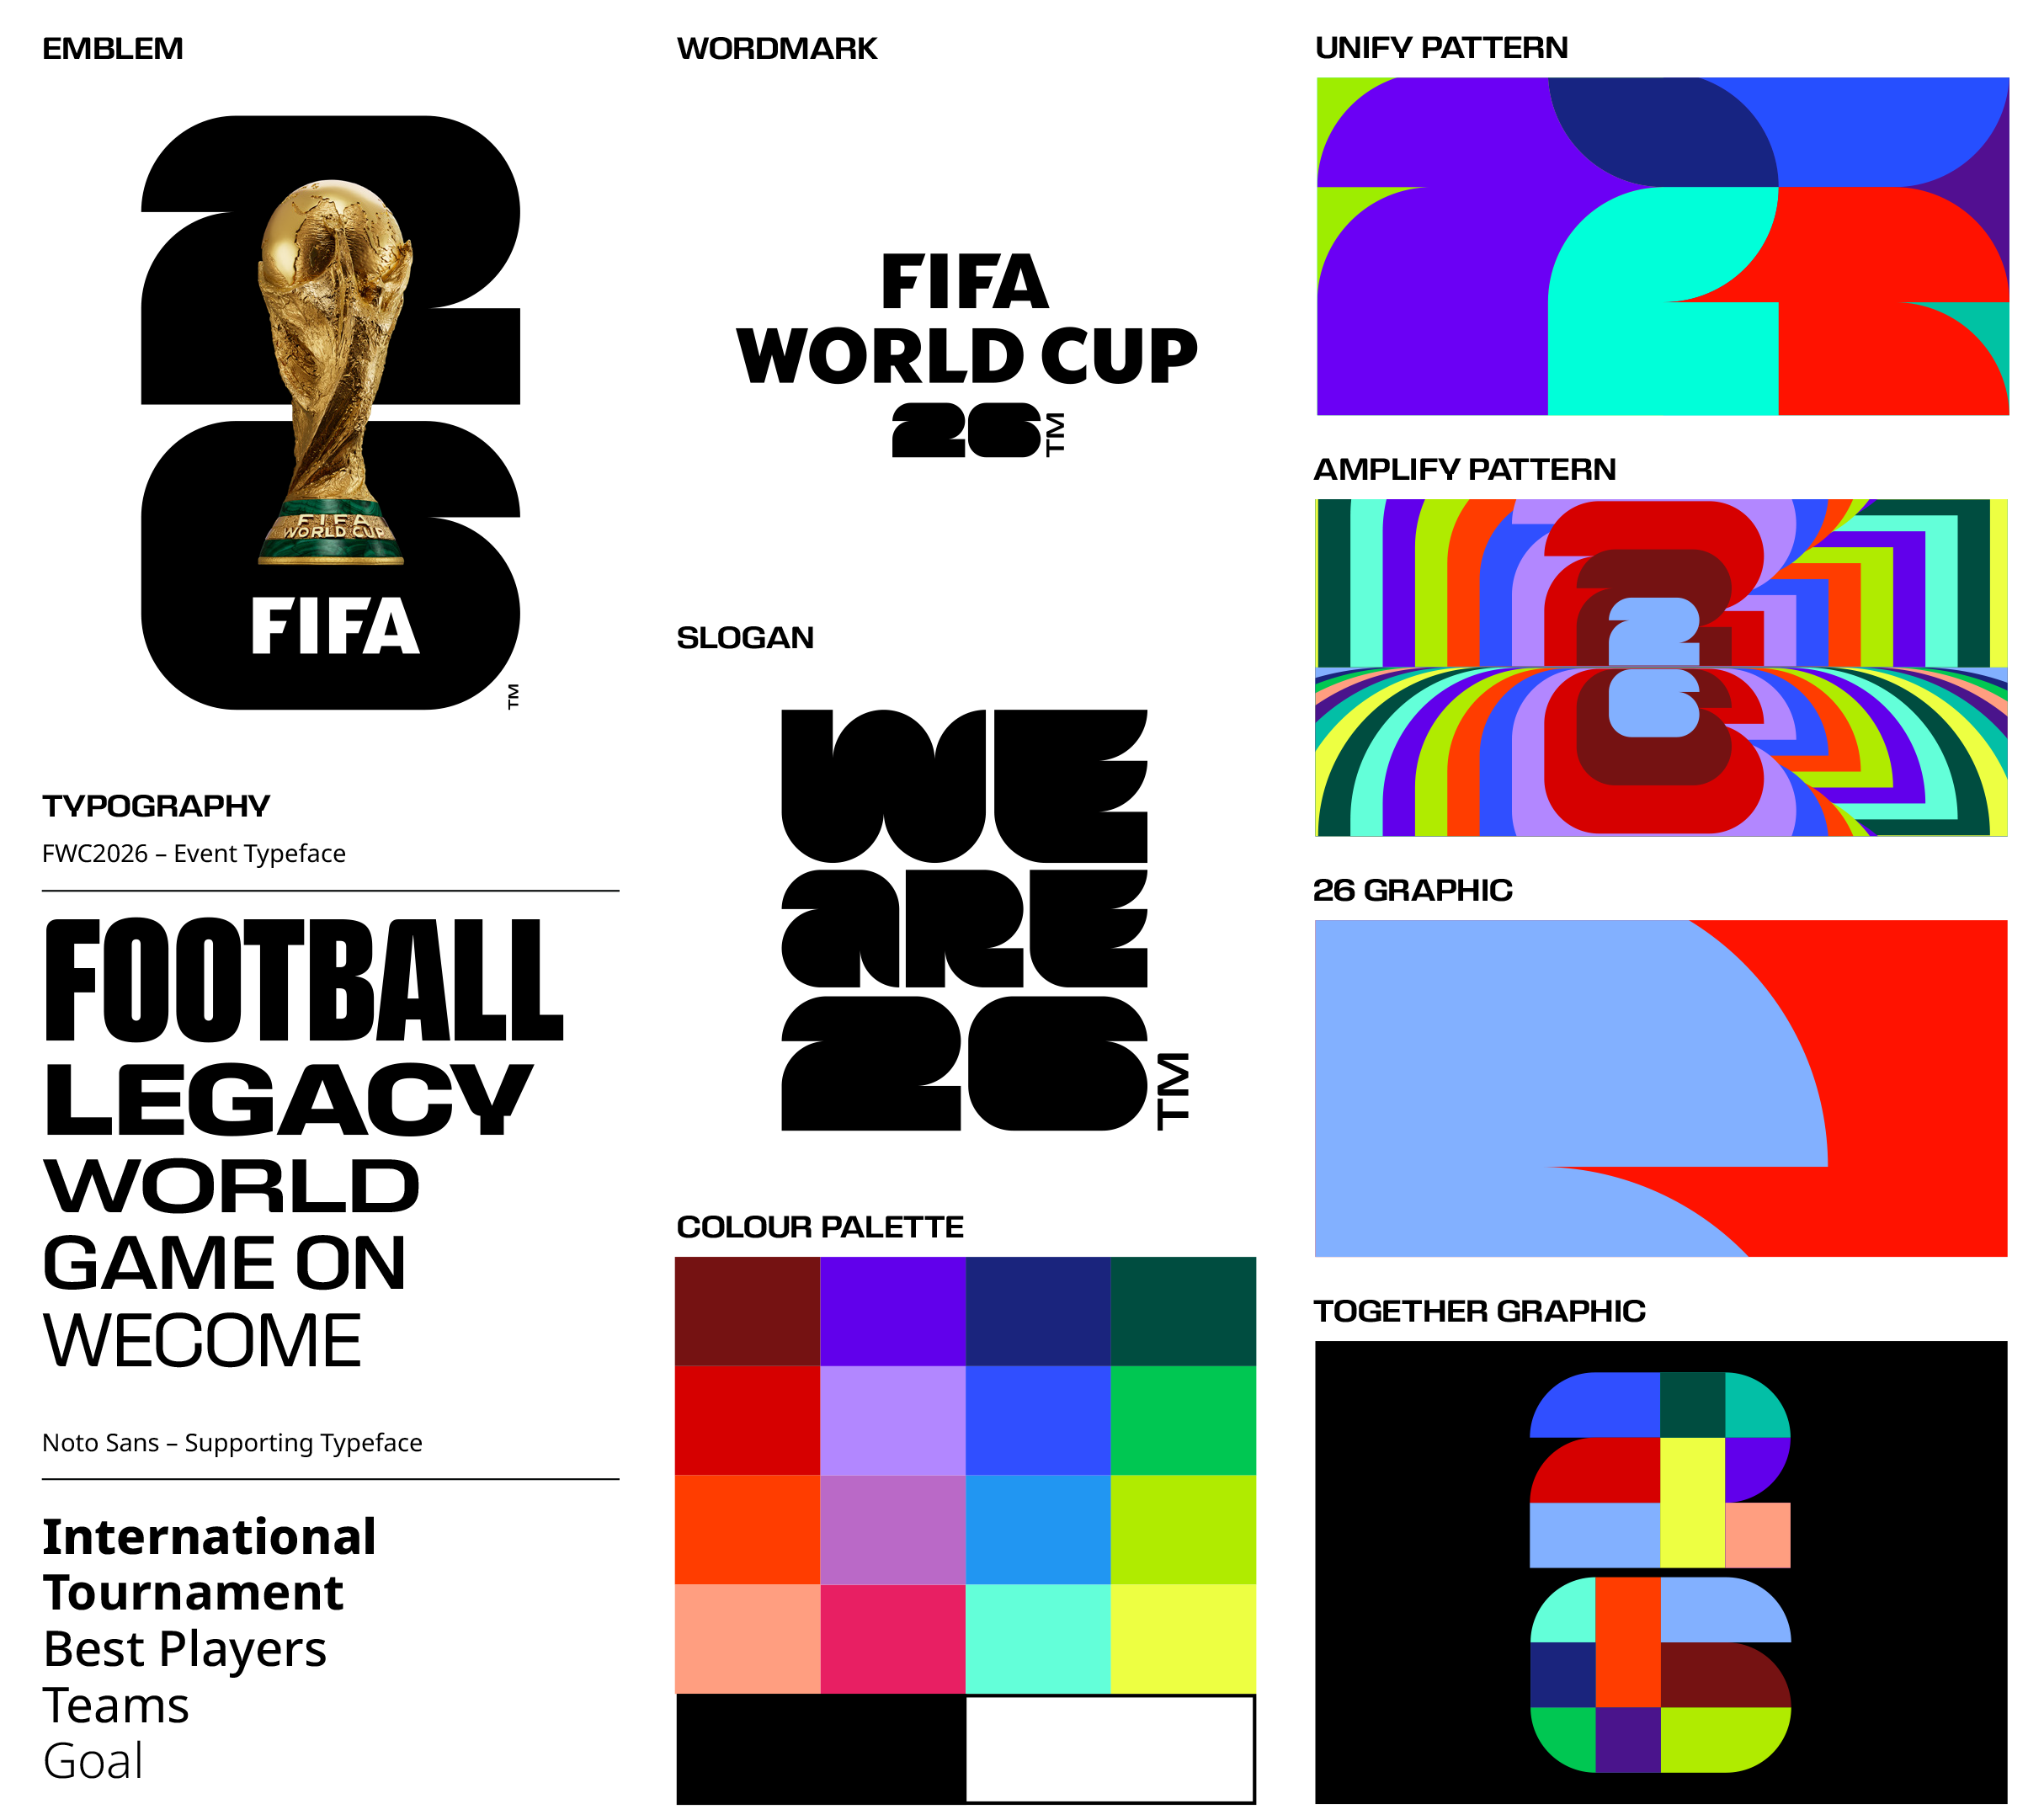 Logo style and layout for the 2026 World Cup in USA, Mexico, and Canada. (Courtesy FIFA)